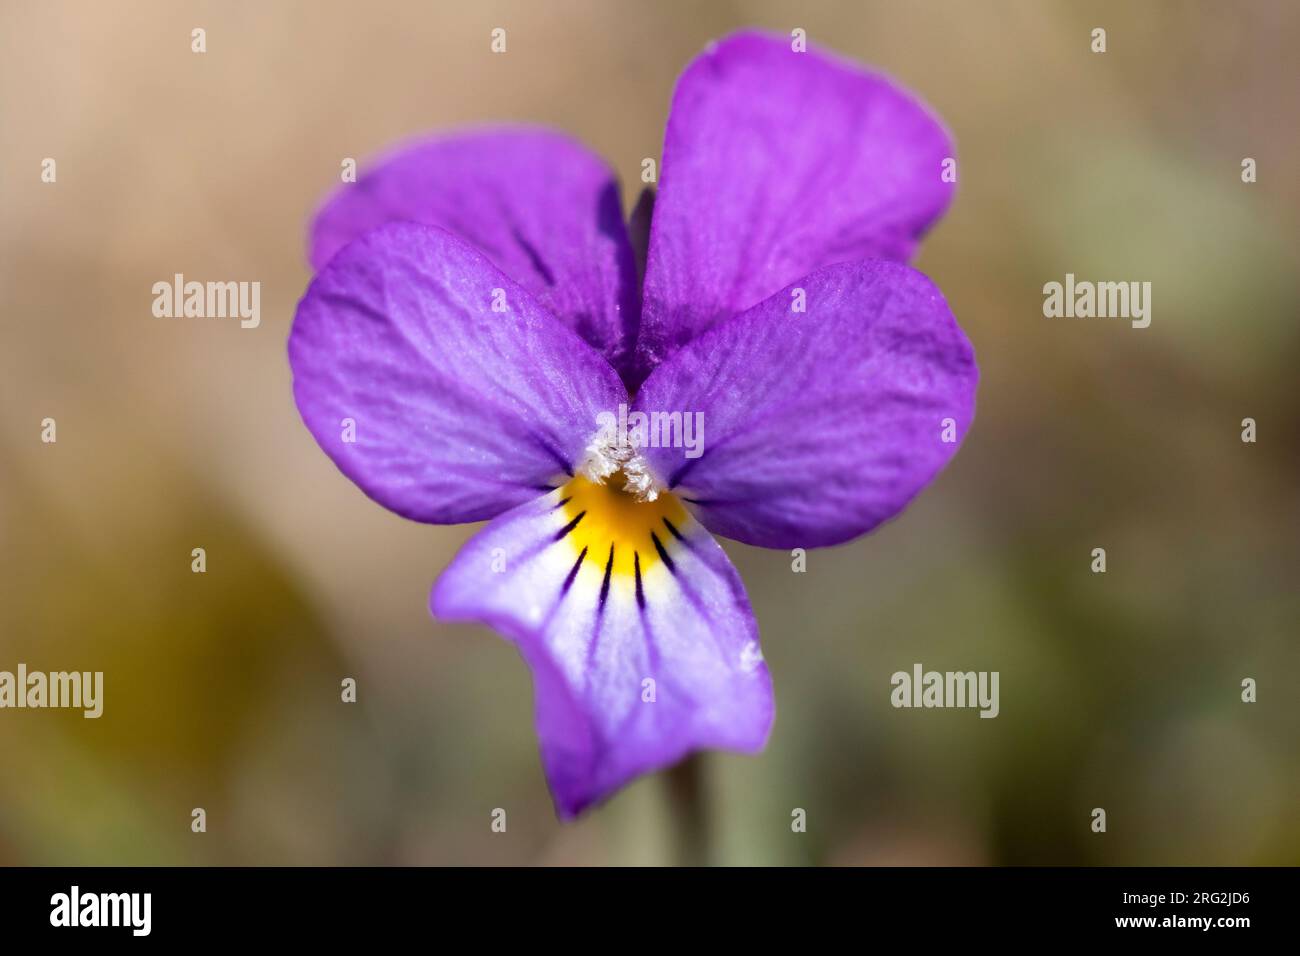 Duinviooltje, Dune Pansy, Viola tricolor subsp. curtisii Foto Stock